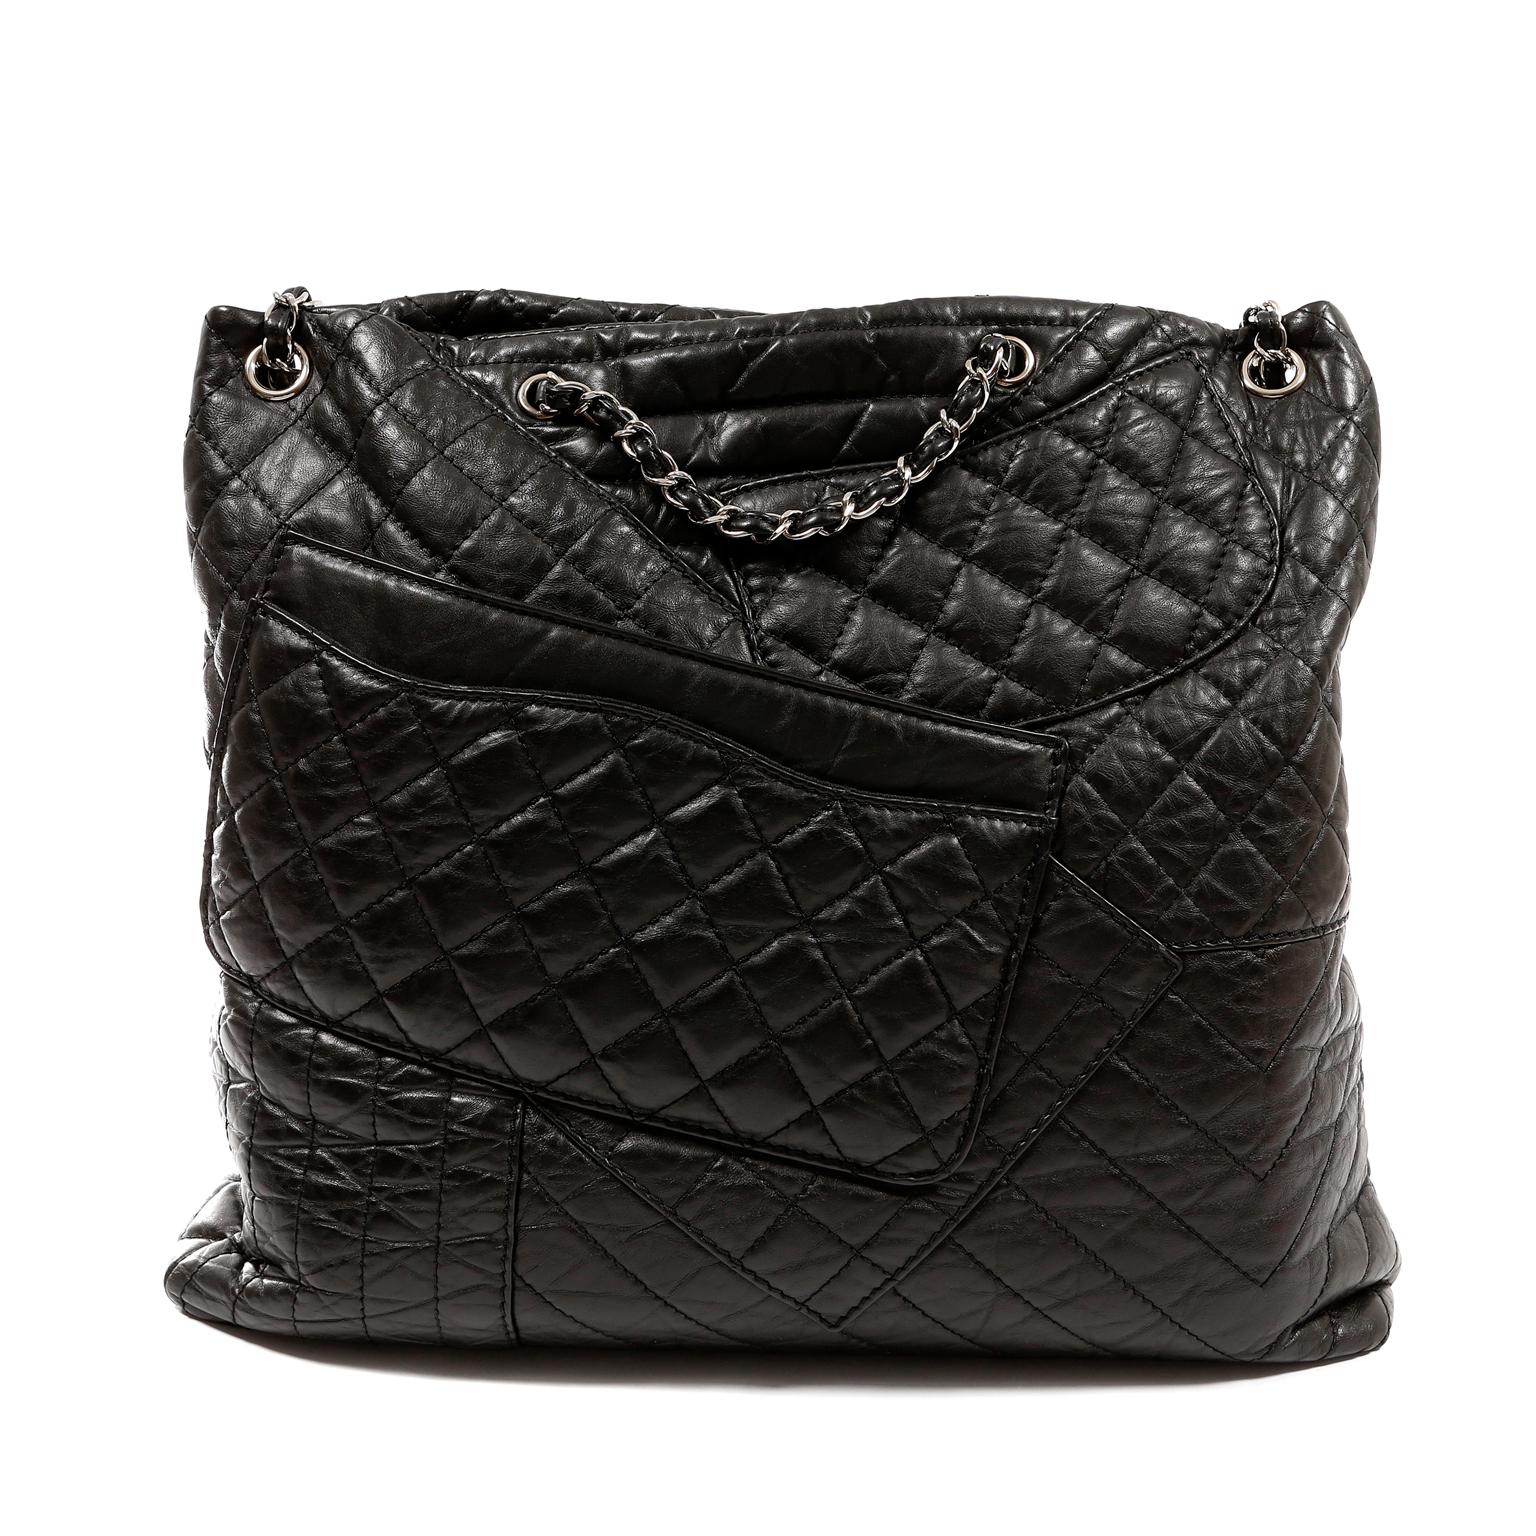 This authentic Chanel Black Calfskin Reissue Pocket Tote is in excellent condition. Ultra chic details make this a true standout in any collection.
Intentionally distressed black calfskin is quilted in signature Chanel diamond pattern and arranged